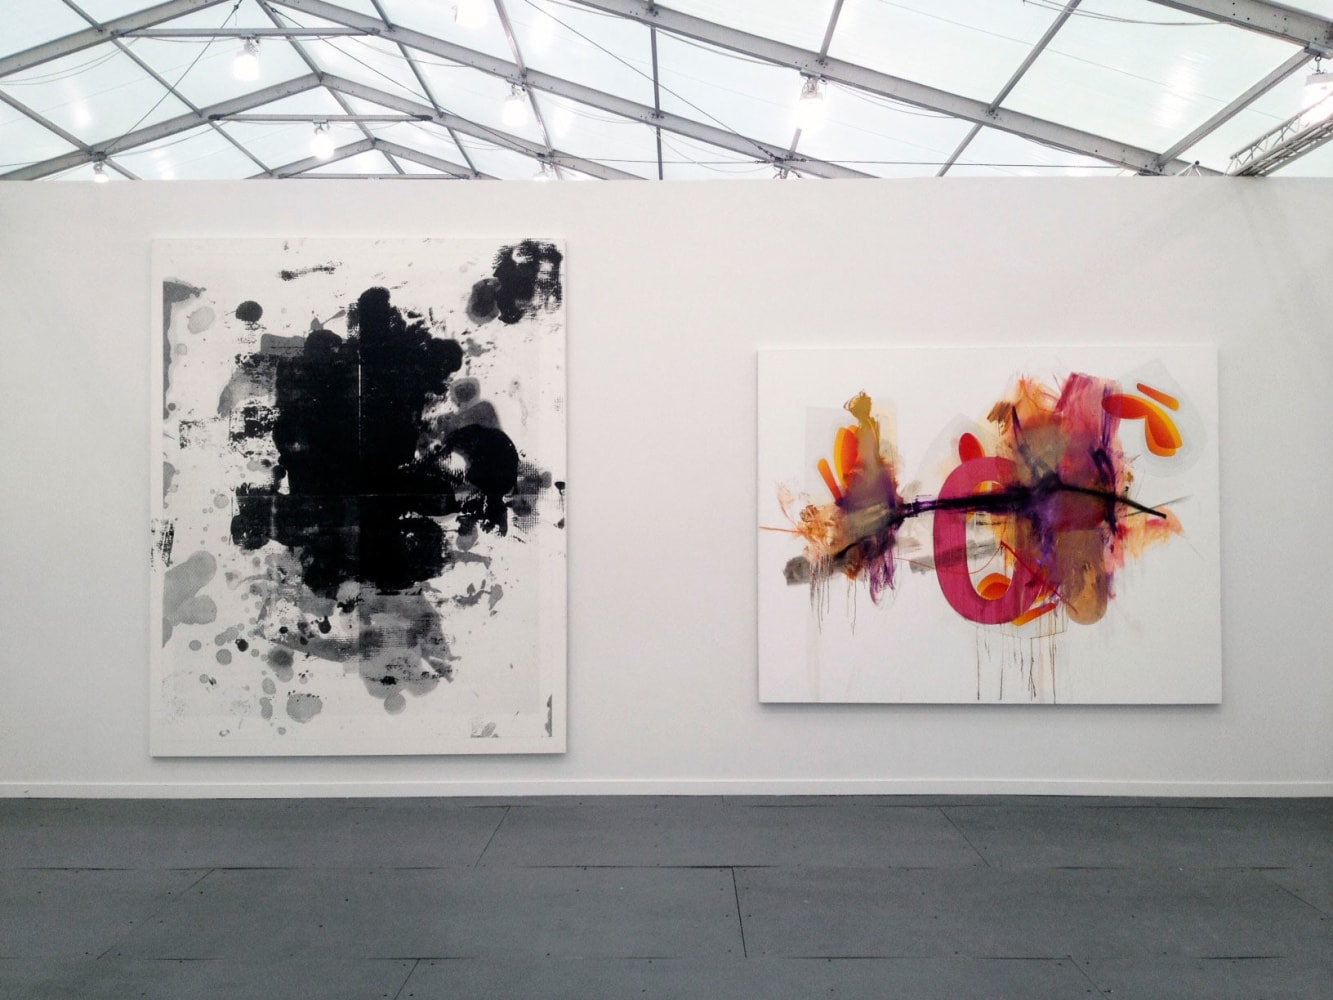 Luhring Augustine

Frieze New York

Installation view

May 9-12, 2014

(Pictured: Christopher Wool, Albert Oehlen)&amp;nbsp;